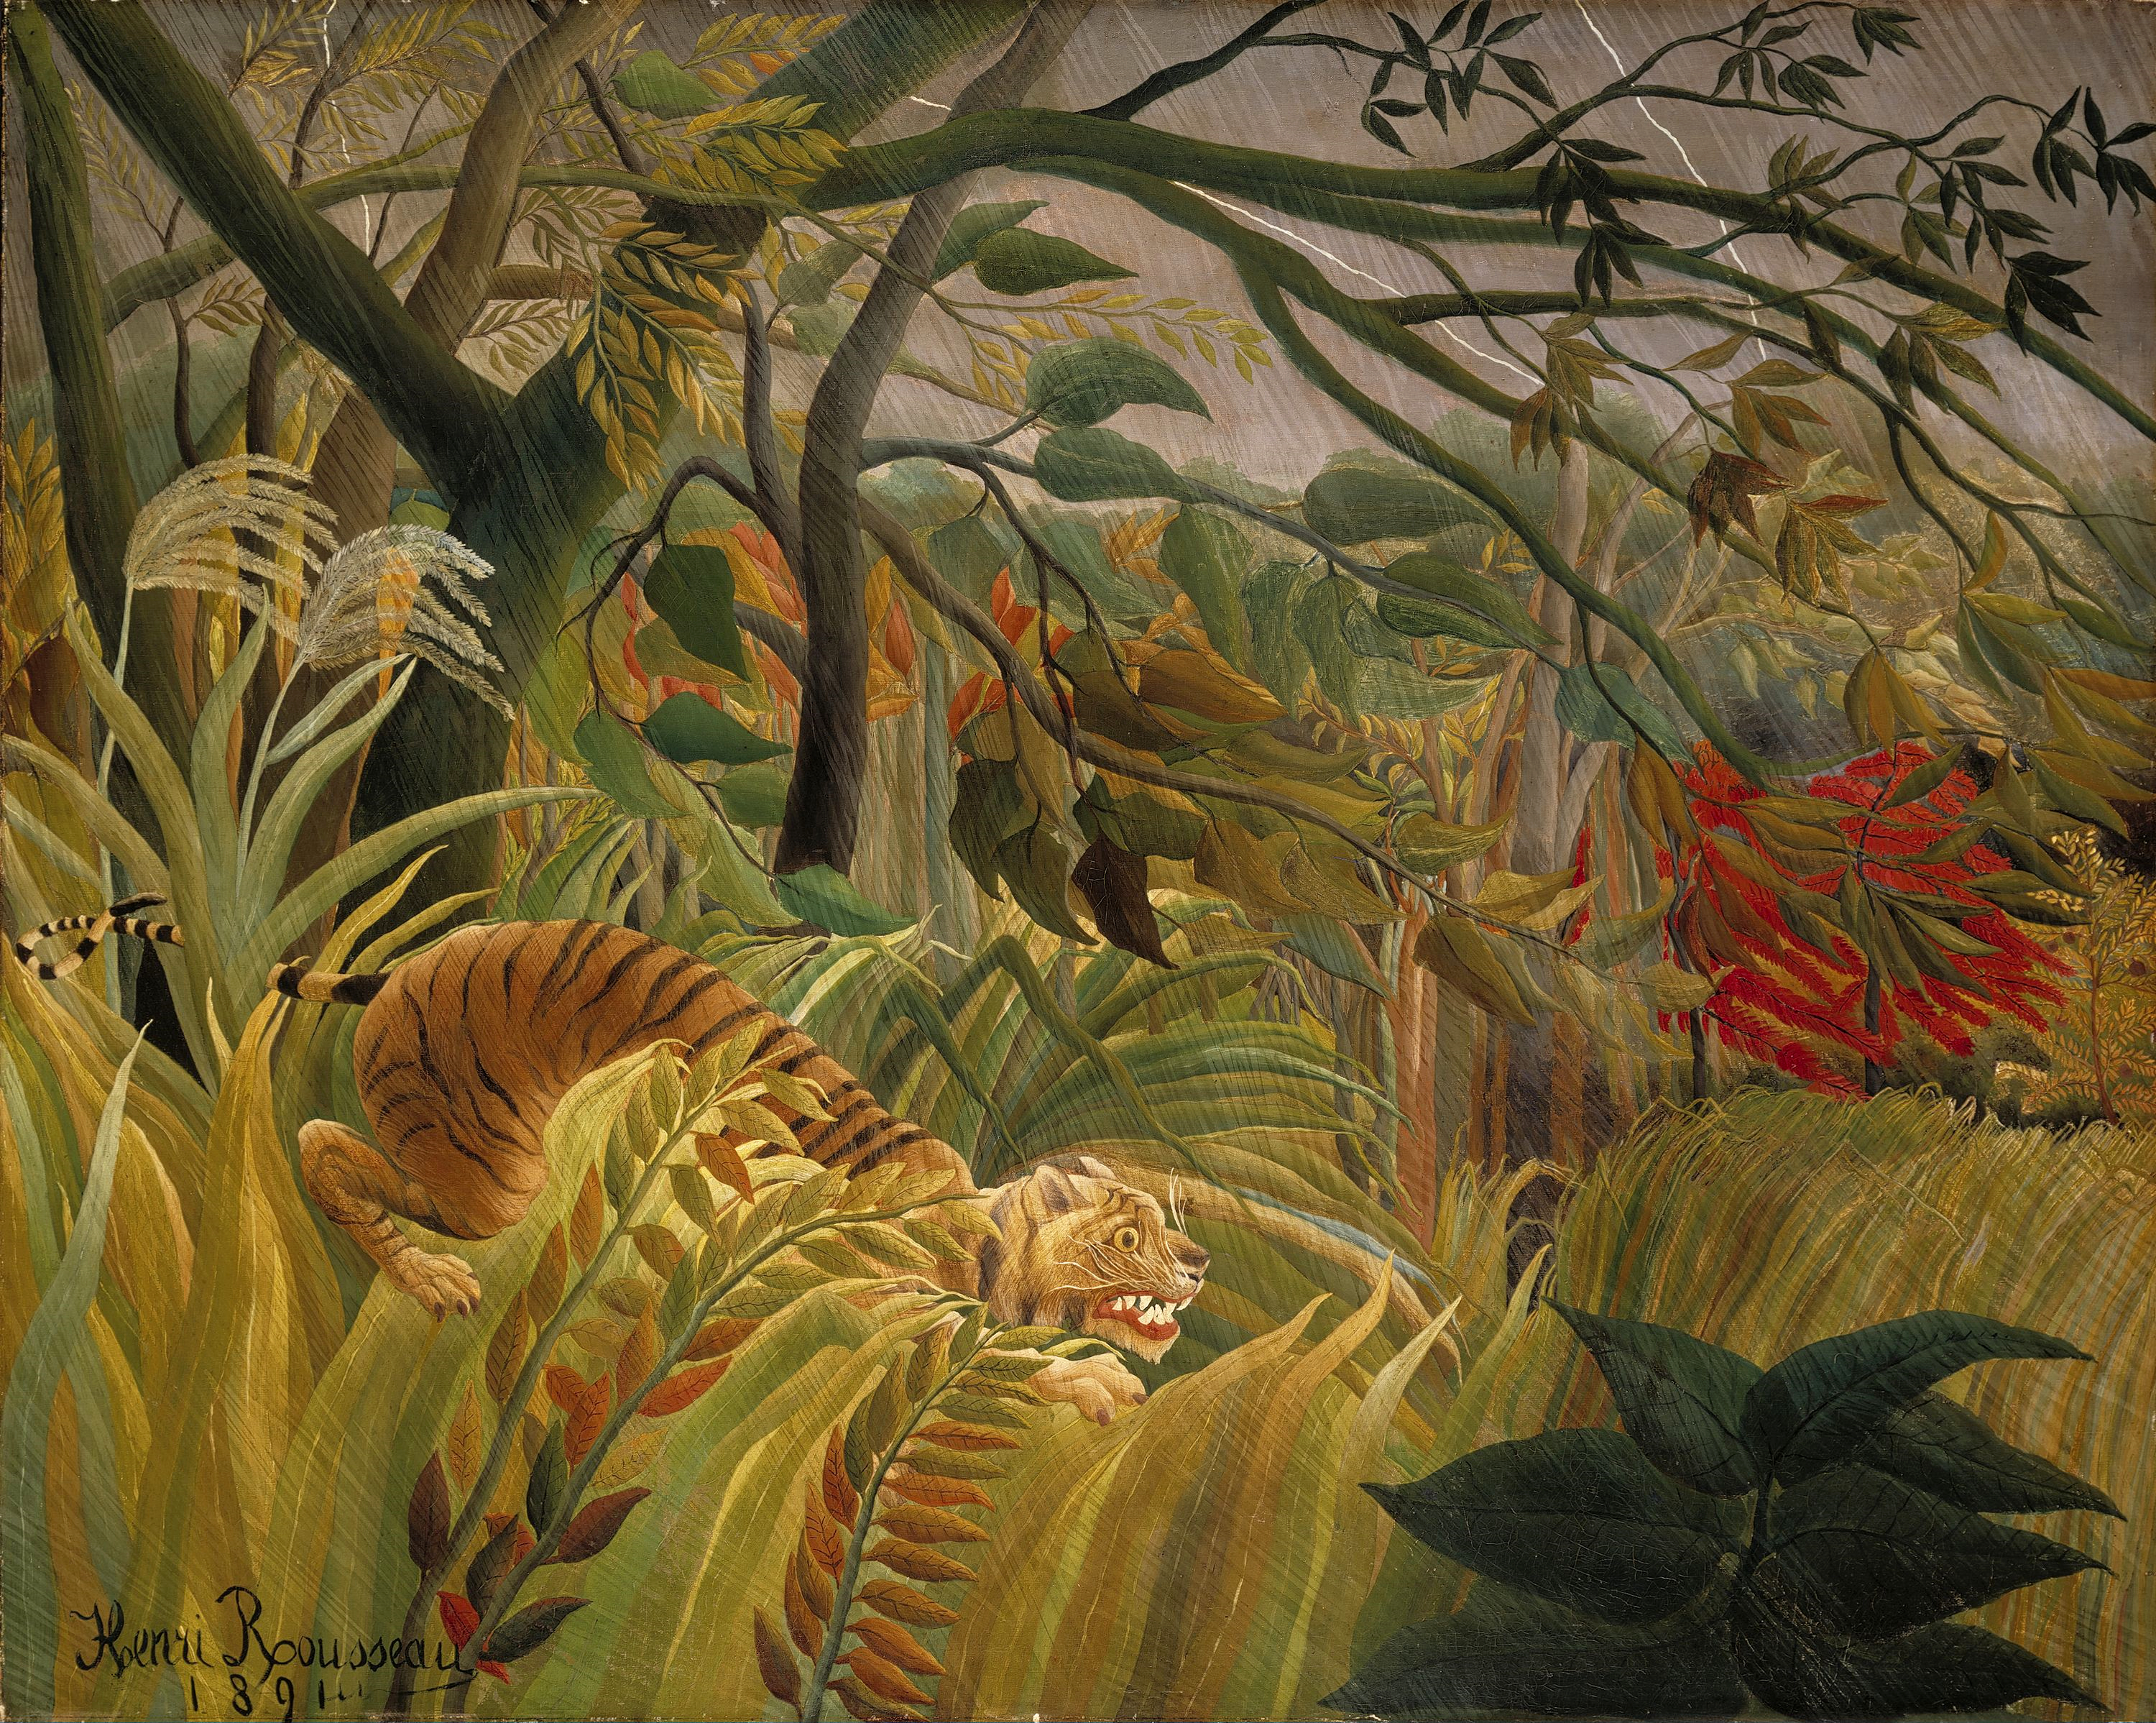 'Surprised' by Rousseau